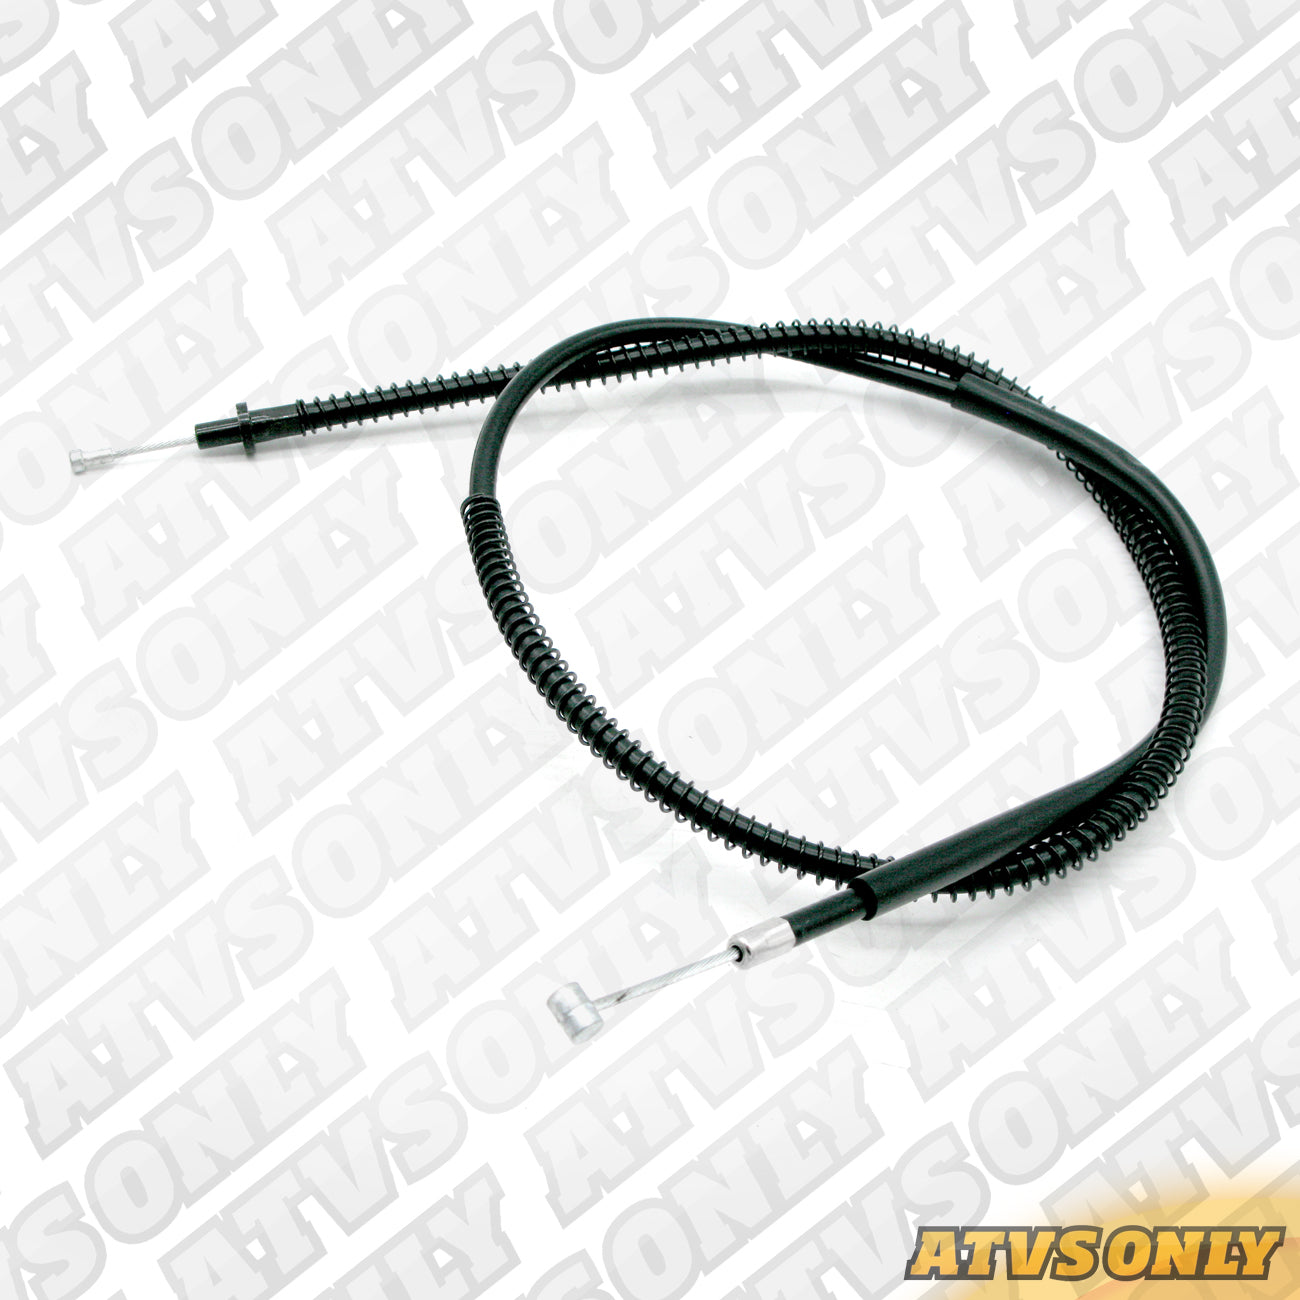 Cables - Replacement Clutch Cable for Yamaha Banshee